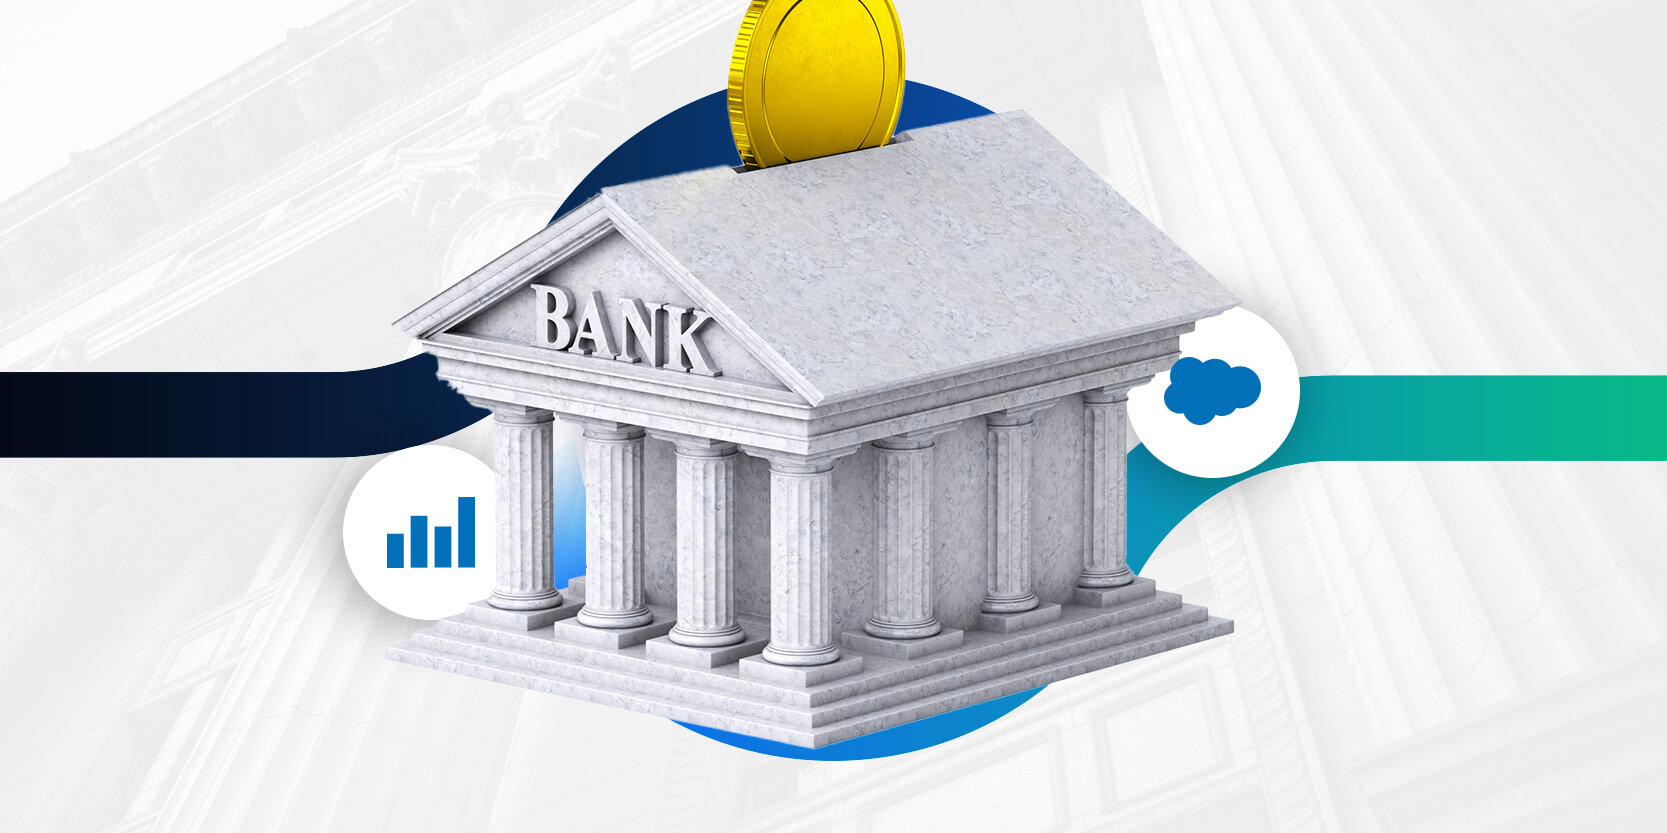 How Does Salesforce Integrate With nCino in the Banking Industry?